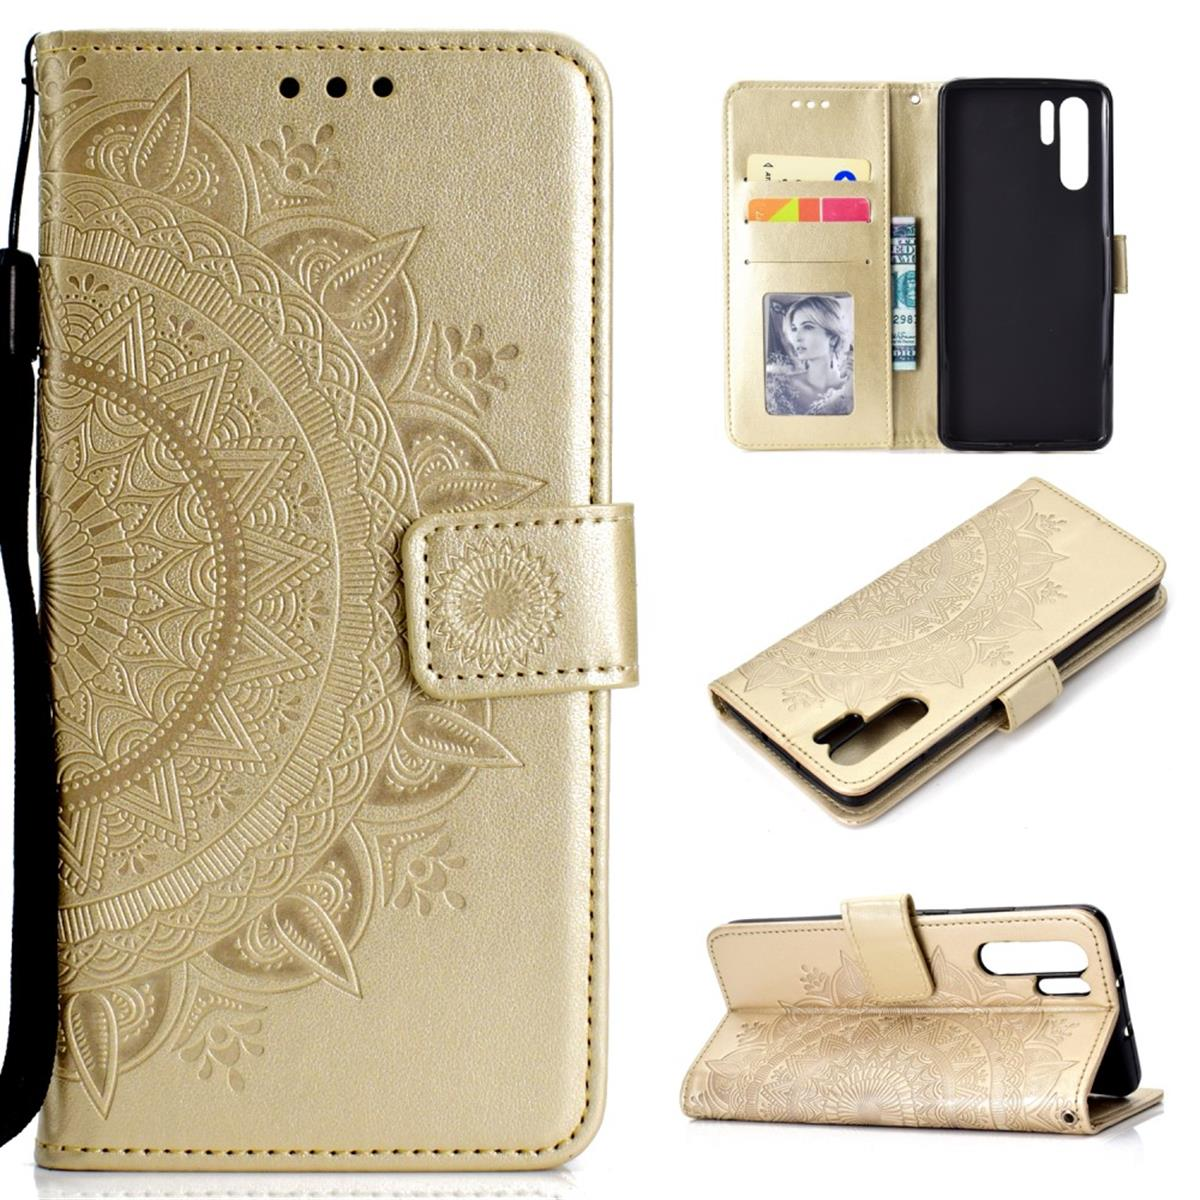 Mandala Gold Huawei, P30 Pro, Bookcover, Muster, Klapphülle COVERKINGZ mit